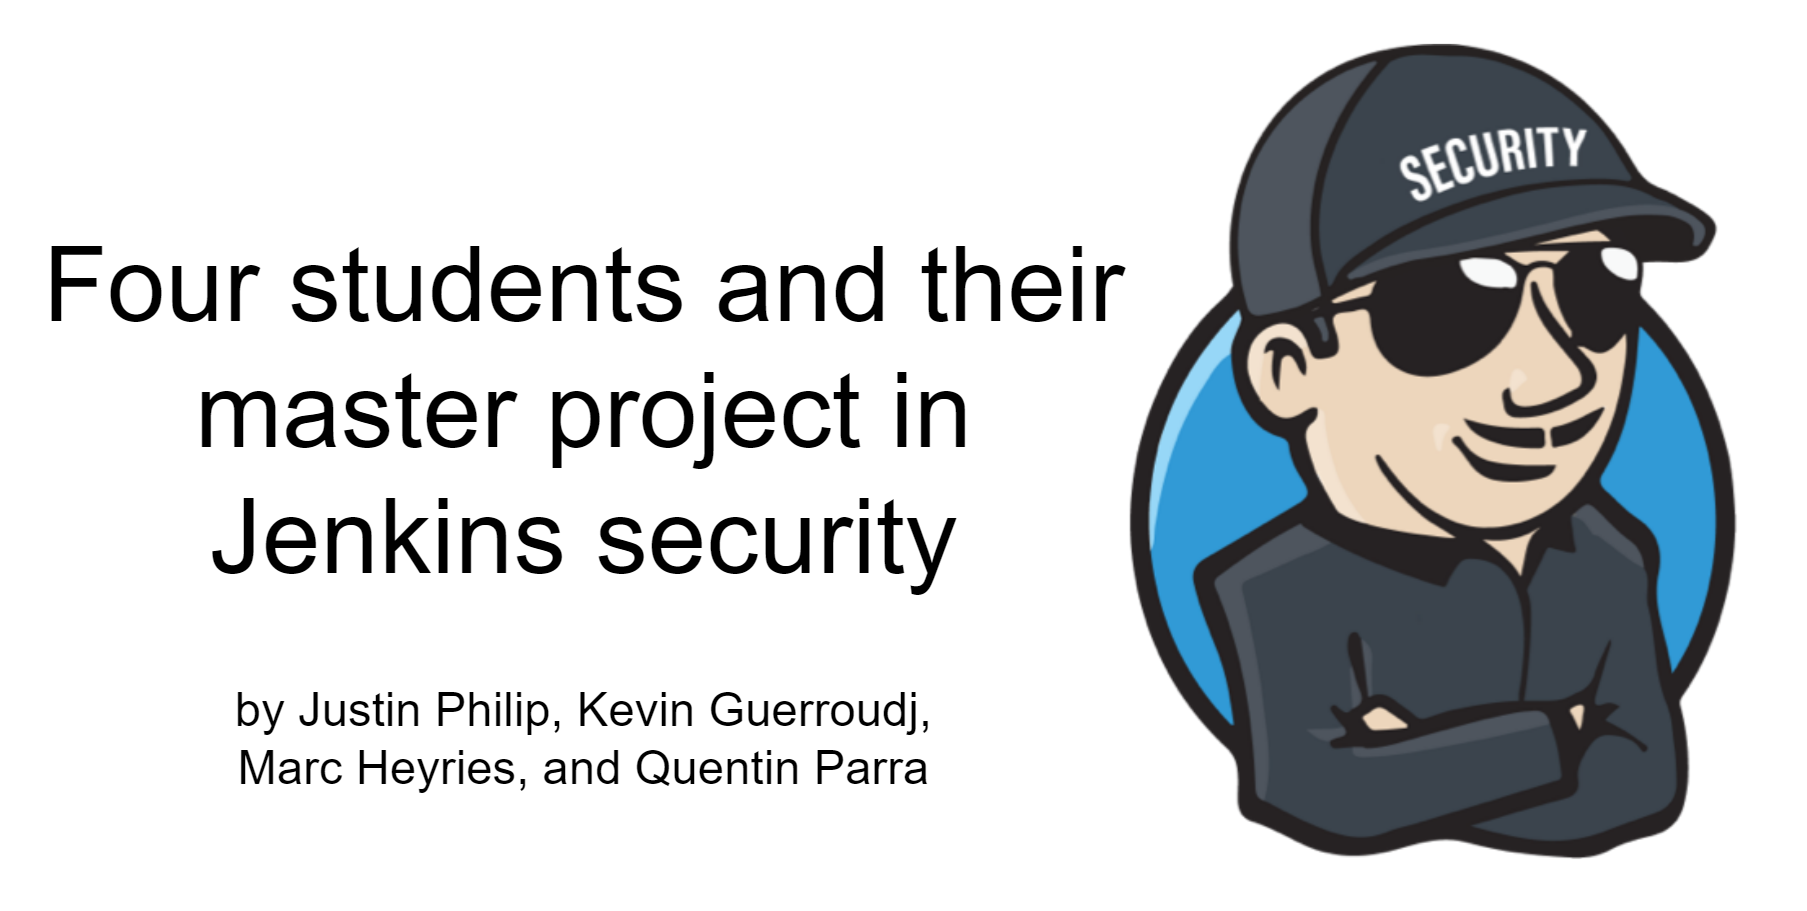 Four students and their master project in Jenkins security